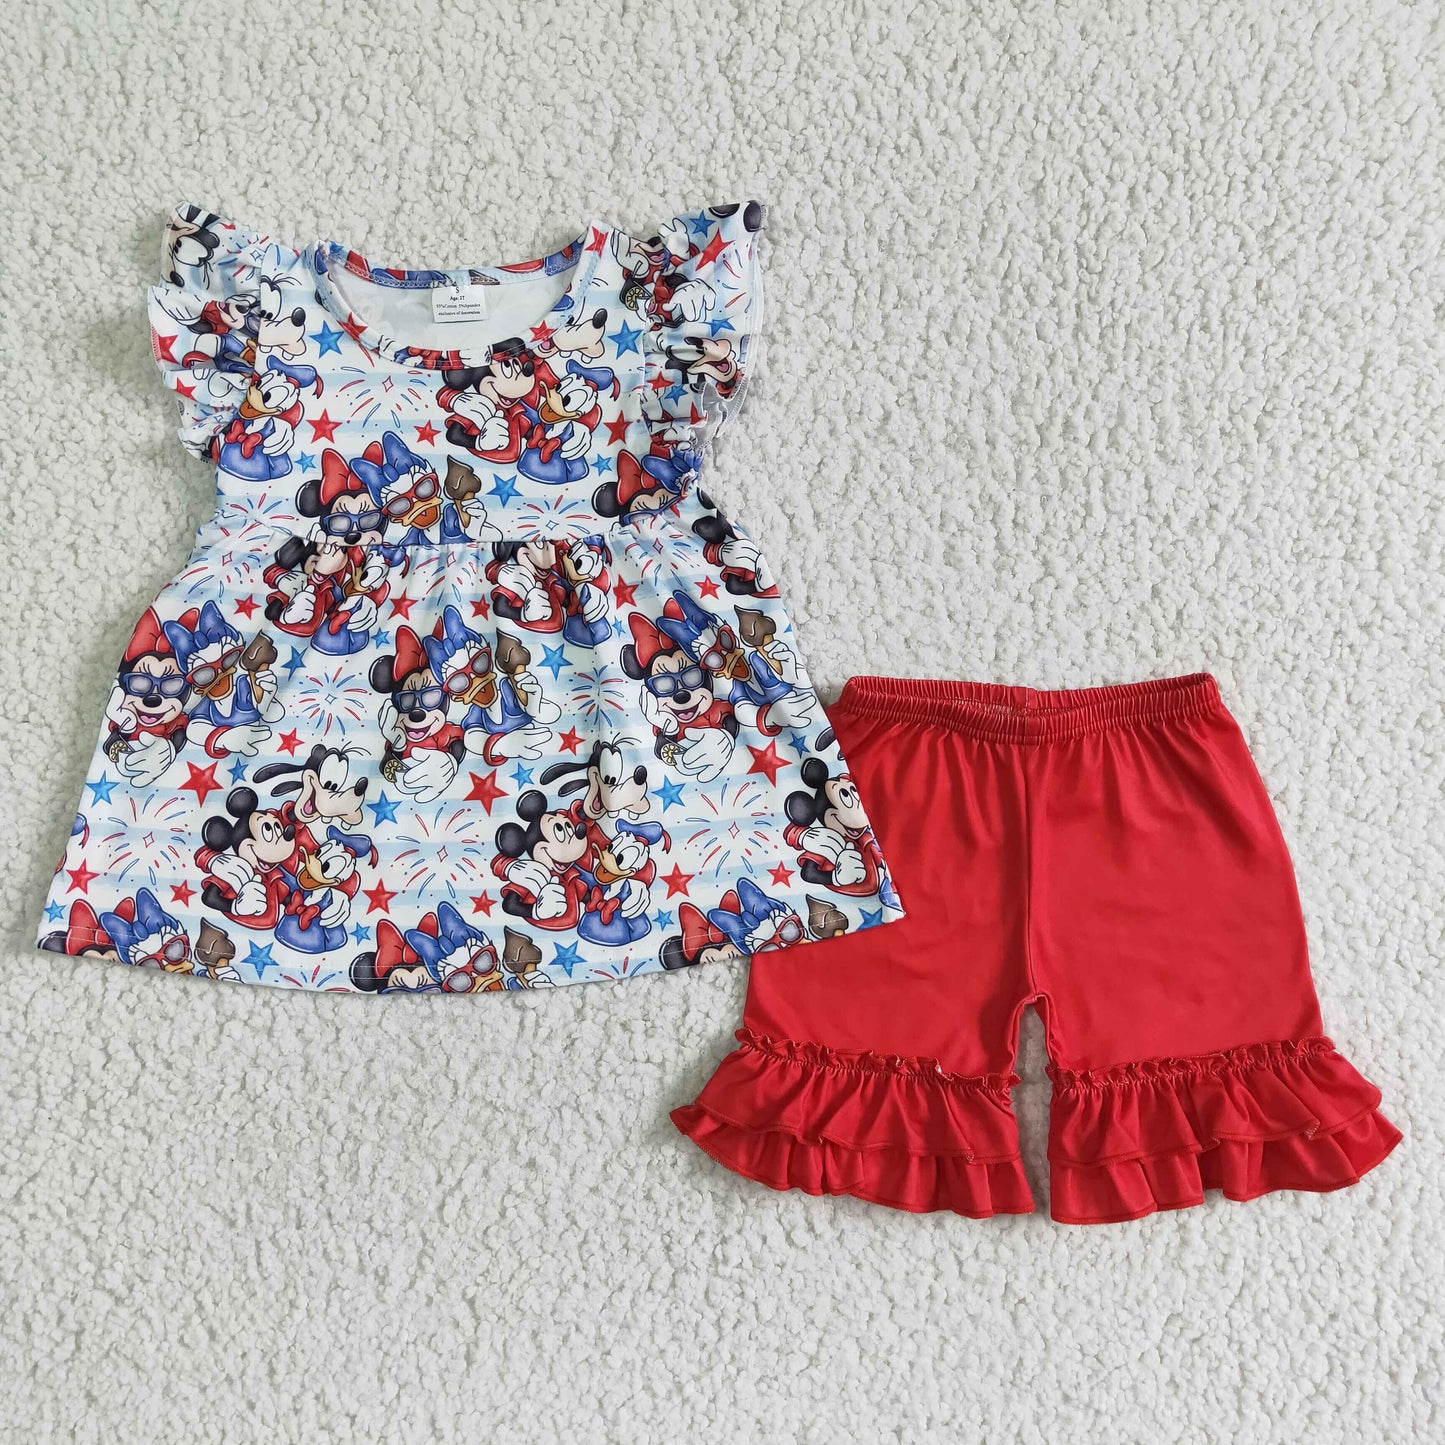 Flutter sleeve red shorts cute girls 4th of july outfits